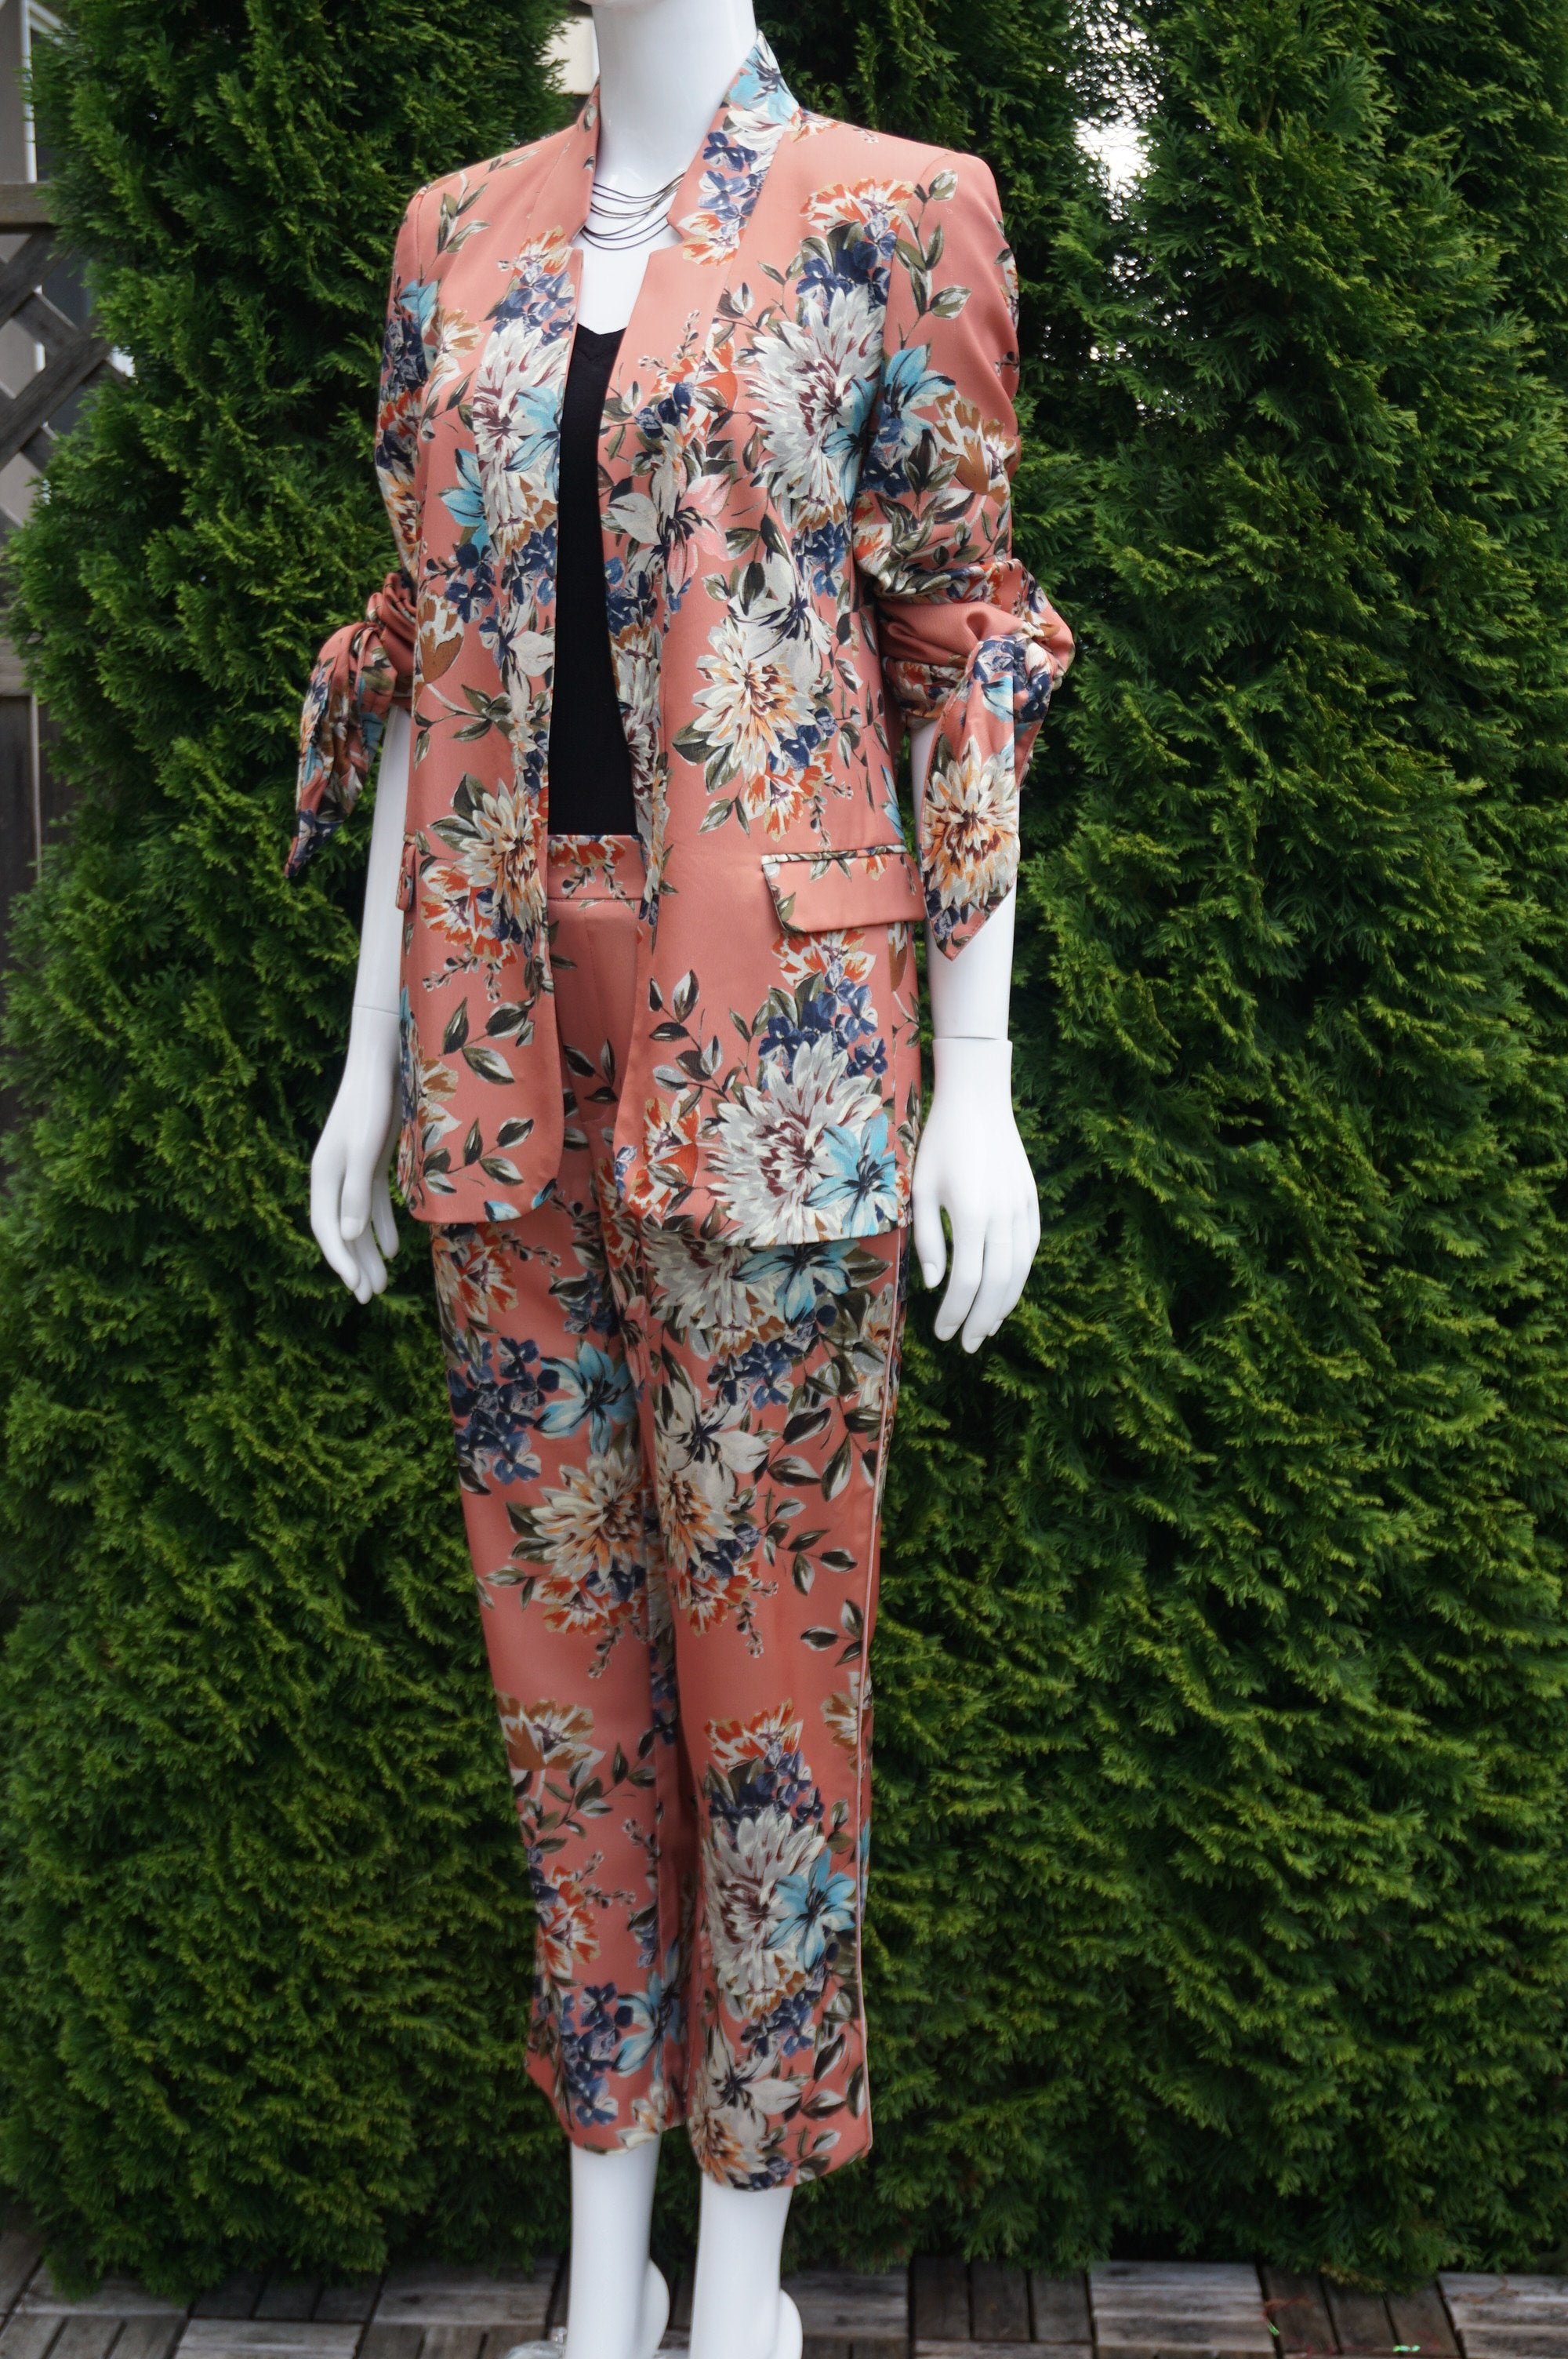 Zara Floral Pant Suit, This unique floral pantsuit helps you take on the world while looking feminine and elegant doing it. Pants length 36 inches, Waist 29 inches, elastic in the back. Suit jacket length 27 inches. Suit shoulder 15 inches. , Pink, Shell,100% Polyester. Lining 100% Acetate. Fabric made in Morocco. , women's Jackets & Coats, Pants, women's Pink Jackets & Coats, Pants, Zara women's Jackets & Coats, Pants, women's pantsuit, women's pant suit, floral pink suit